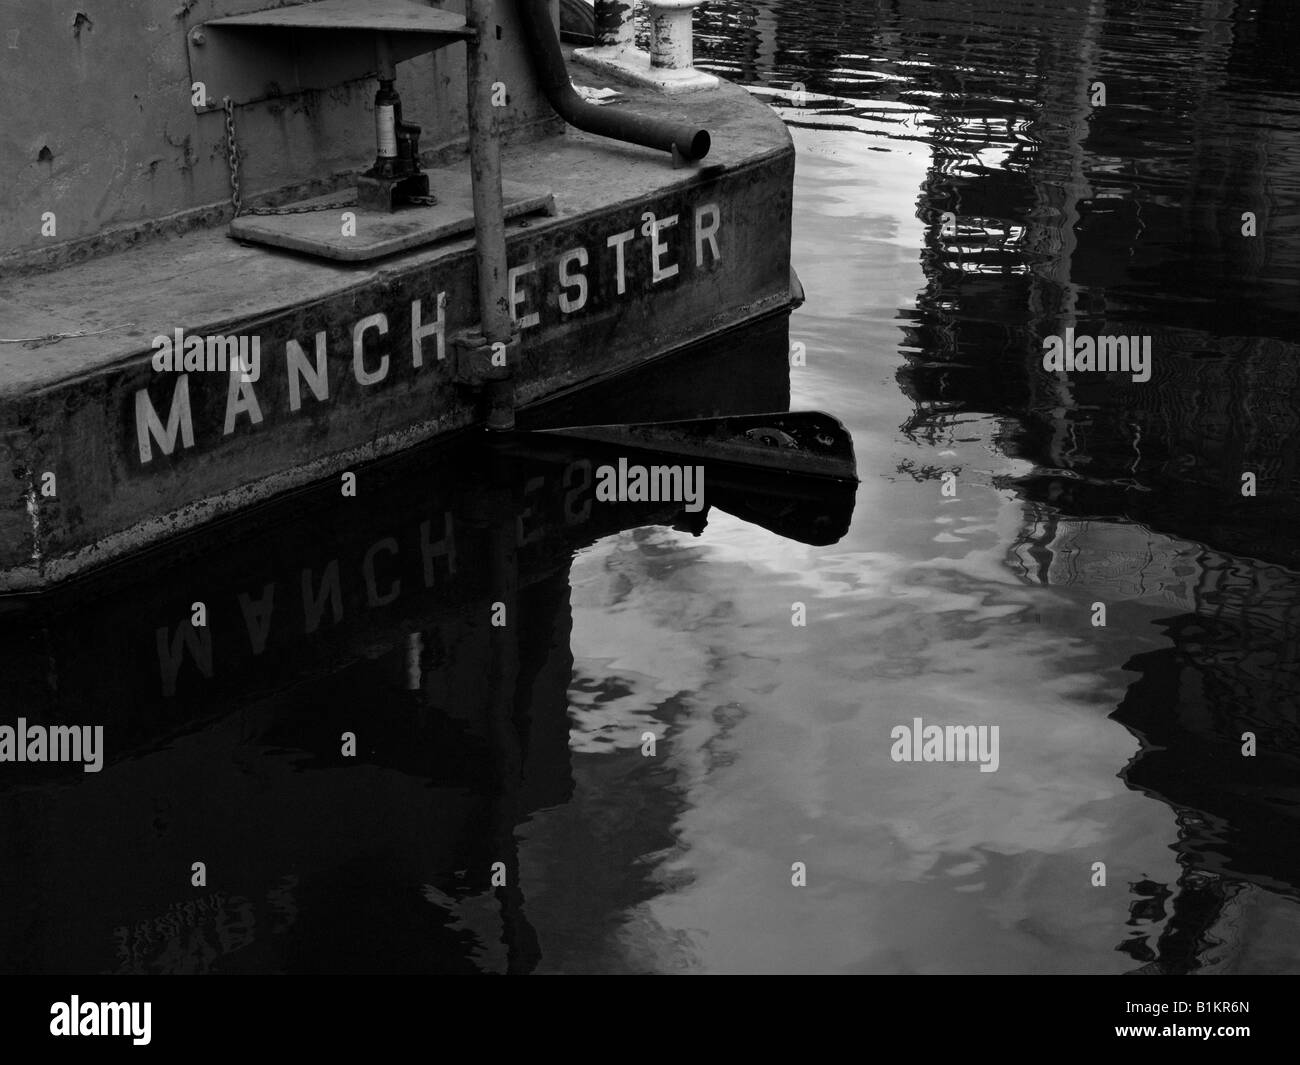 canal boat with manchester label on castlefield Stock Photo